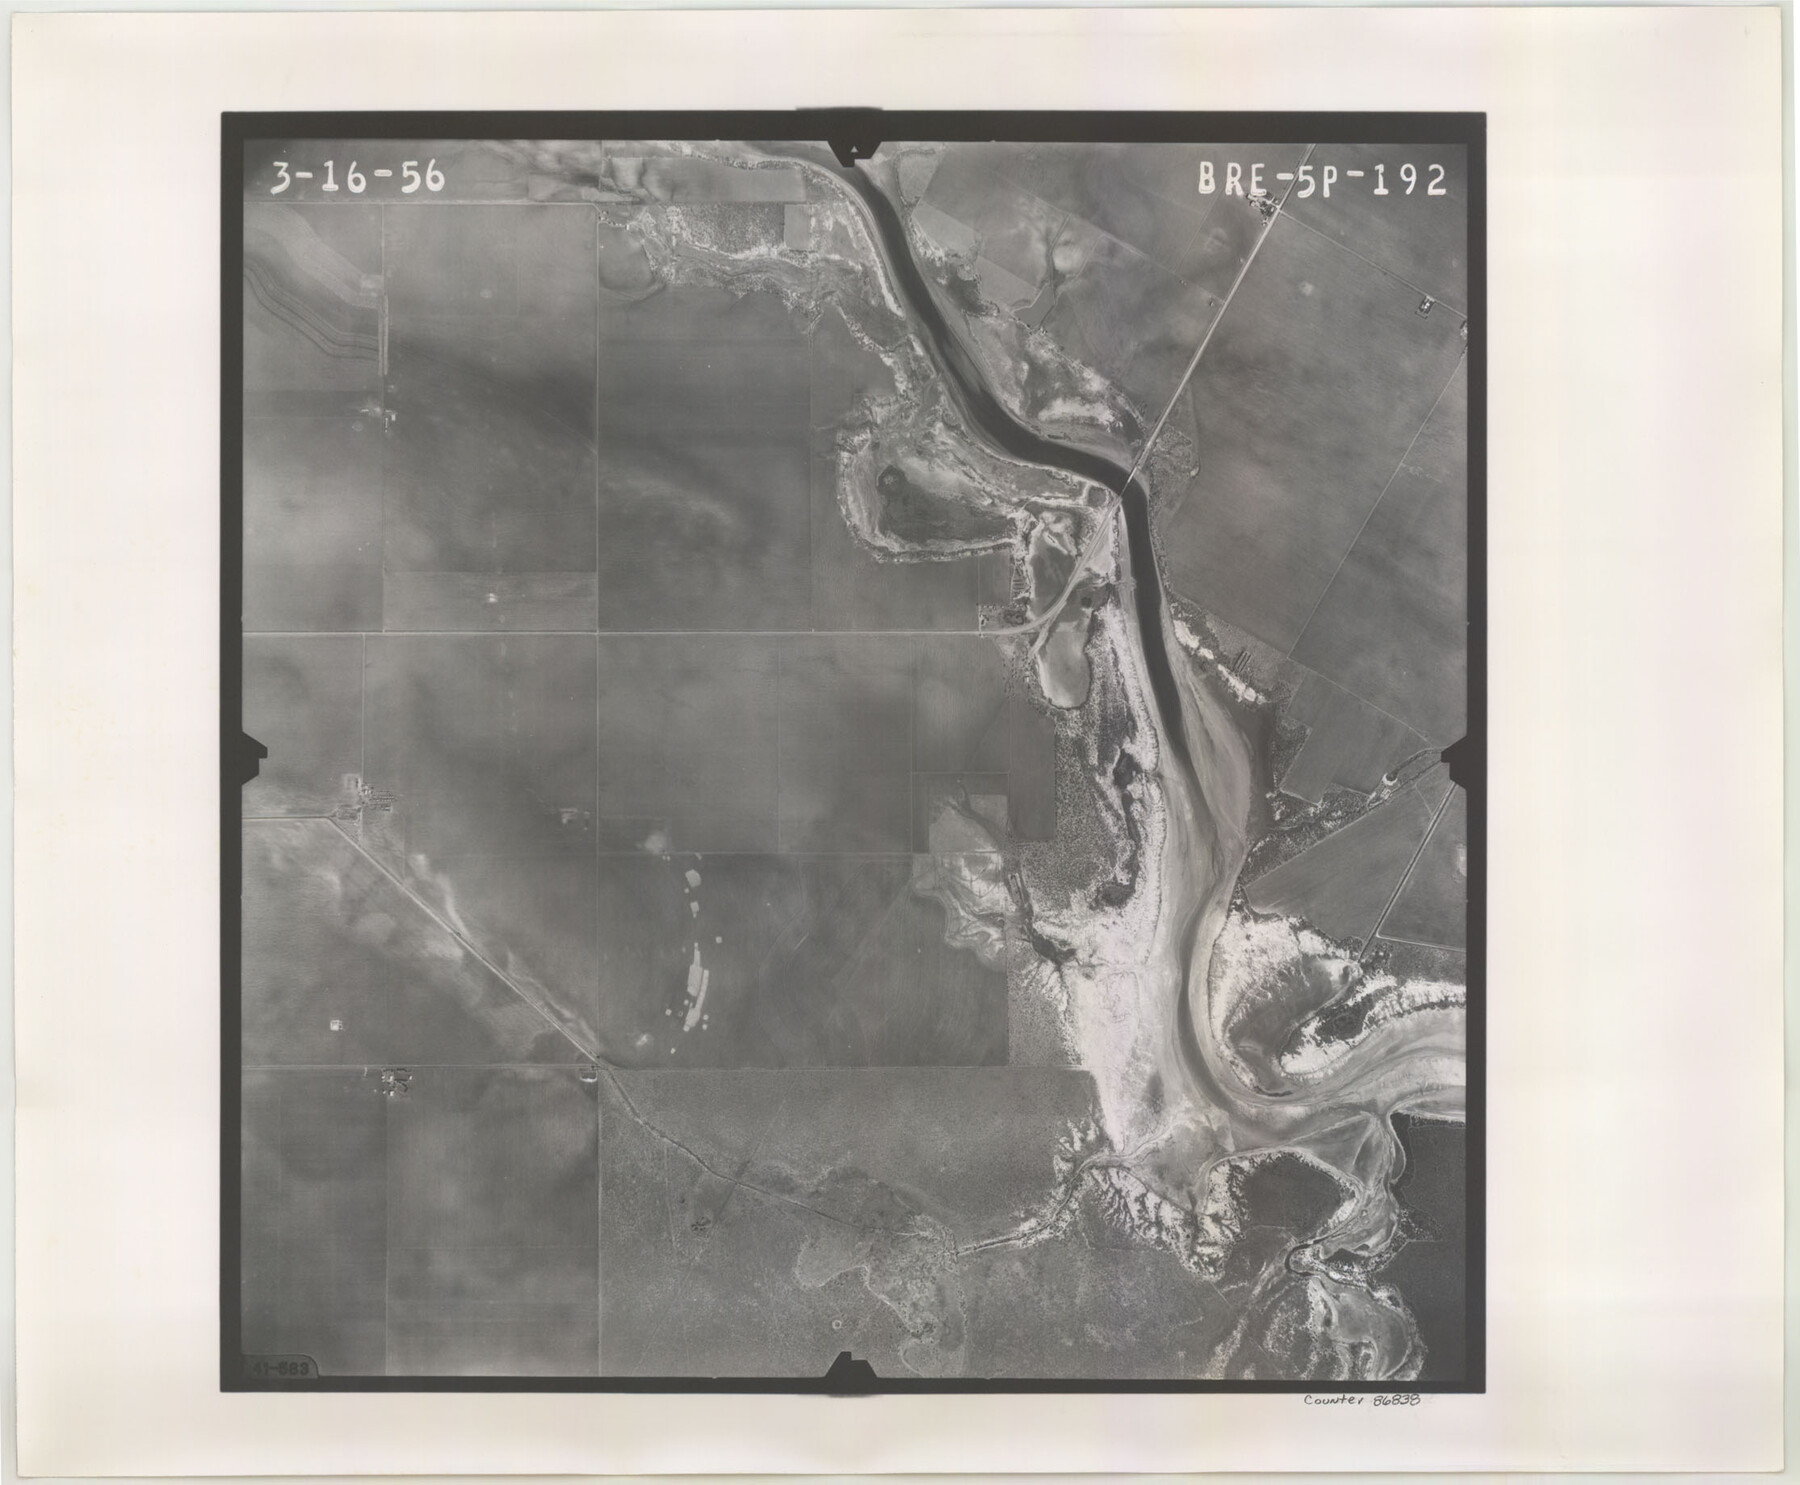 86838, Flight Mission No. BRE-5P, Frame 192, Nueces County, General Map Collection